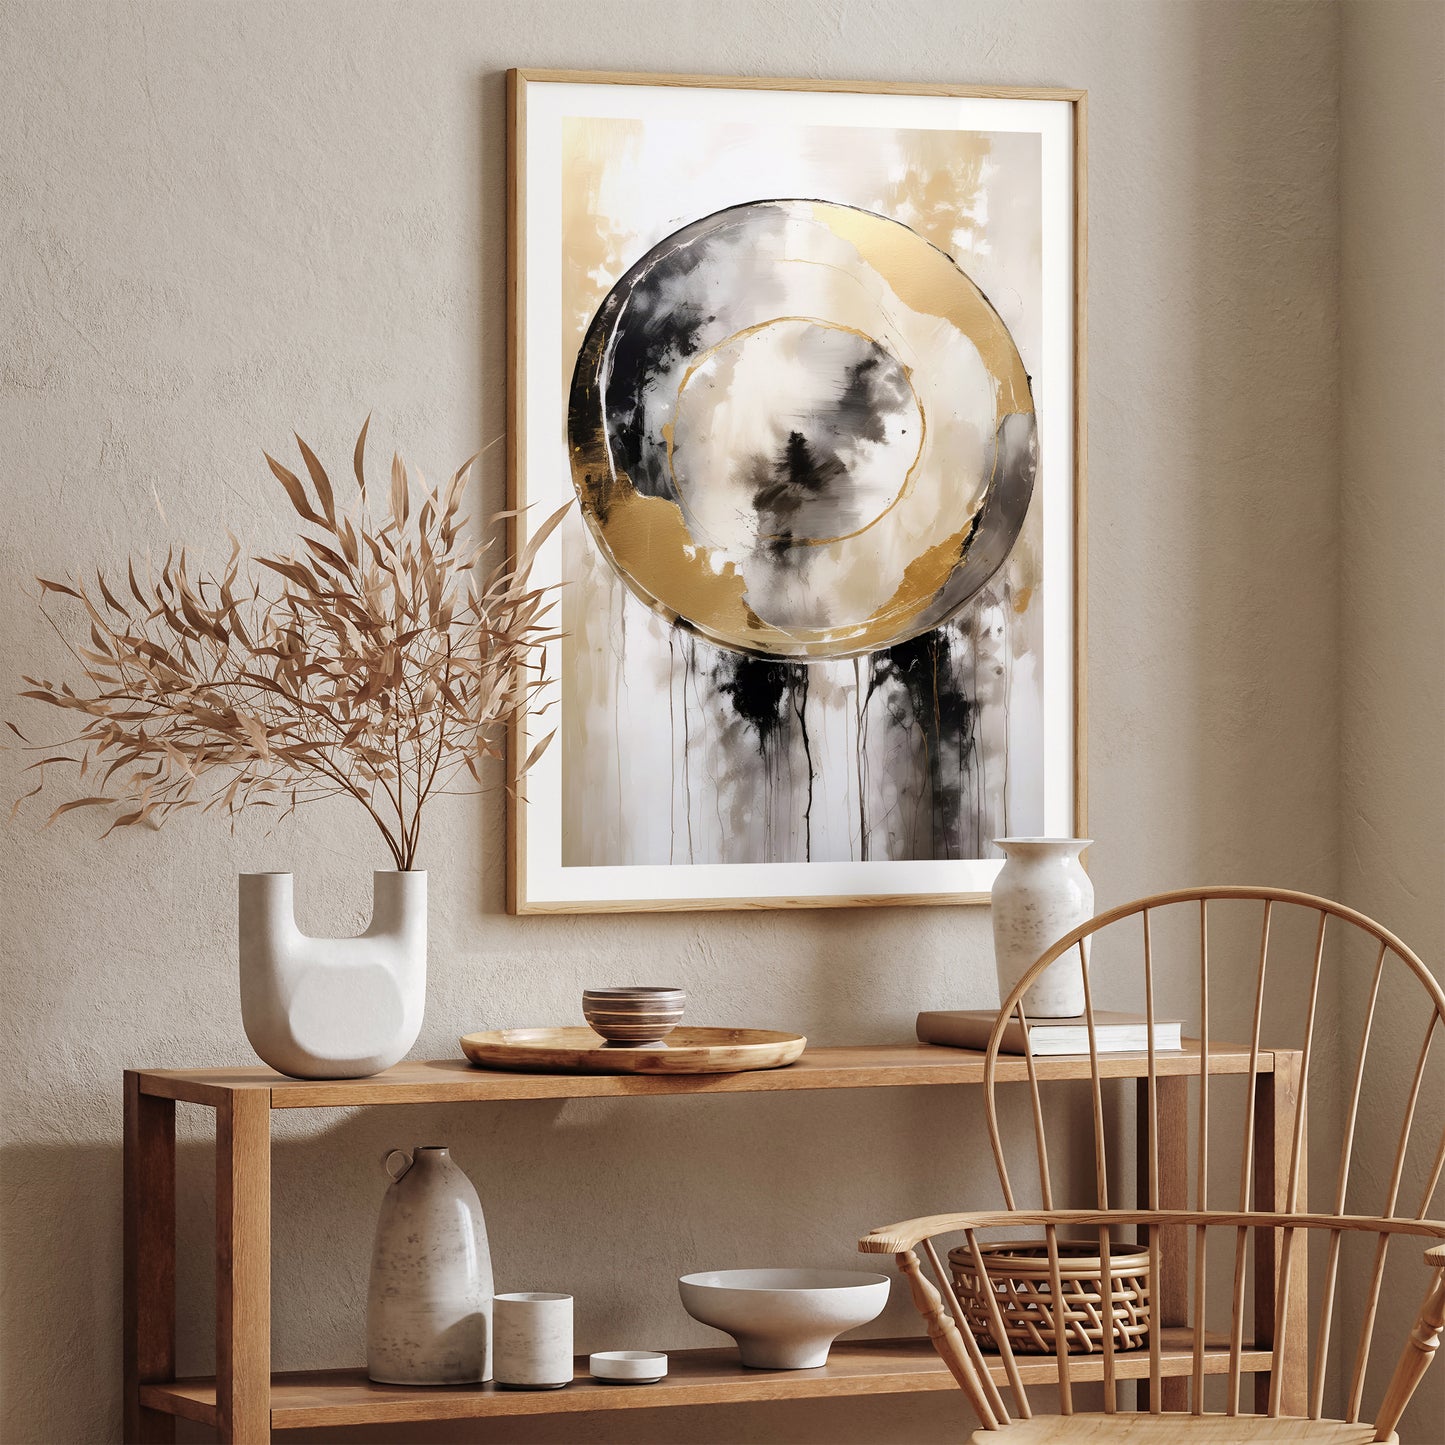 Ethereal Elegance Abstract Wall Art